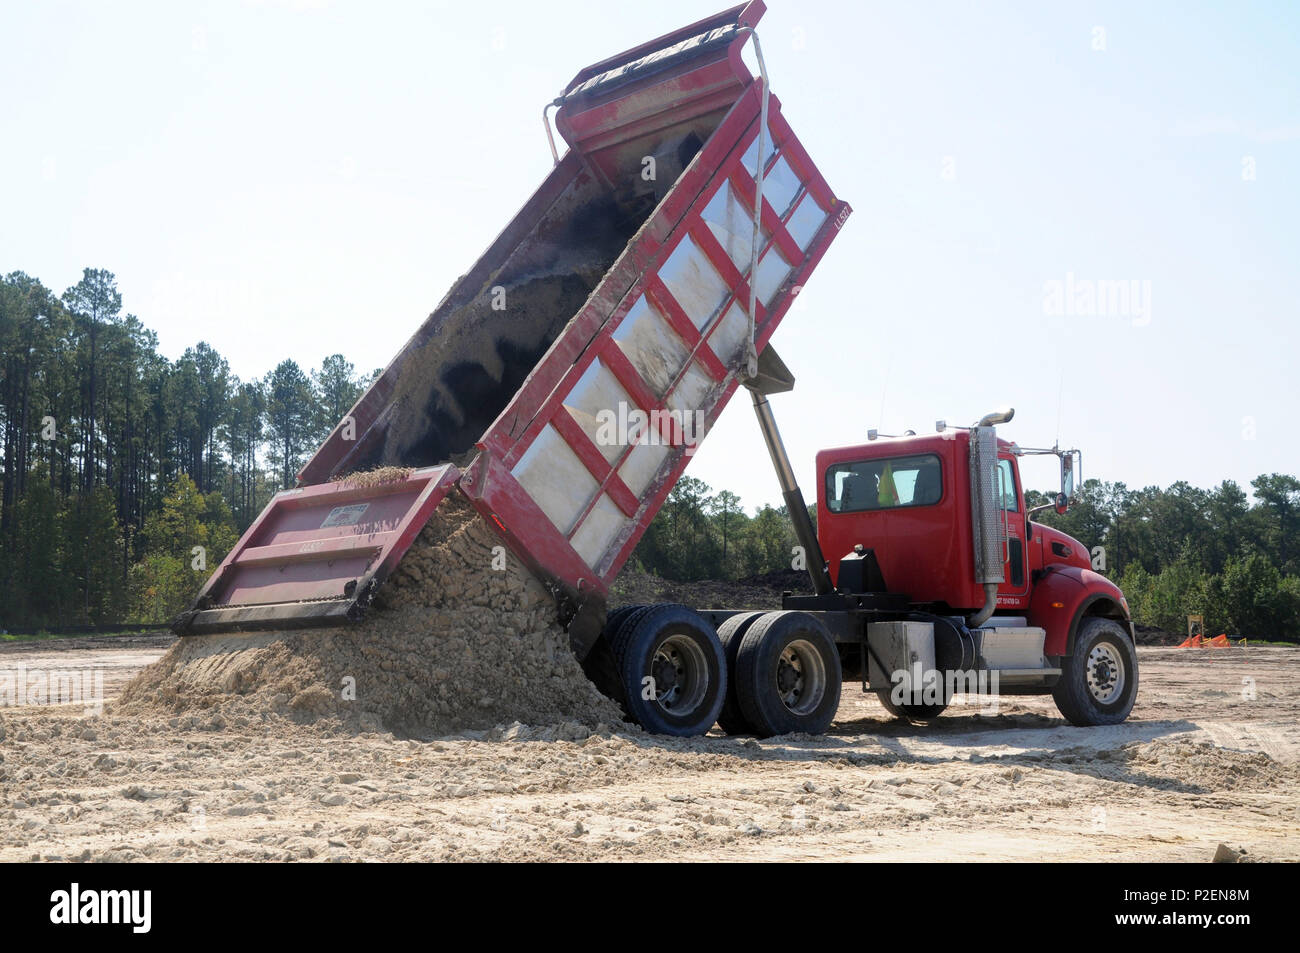 One of 40,000 dump trucks unloads at the Raw Water Storage Impoundment site, which is approximately 30 percent complete. The impoundment is part of the Savannah Harbor Expansion Project. Stock Photo